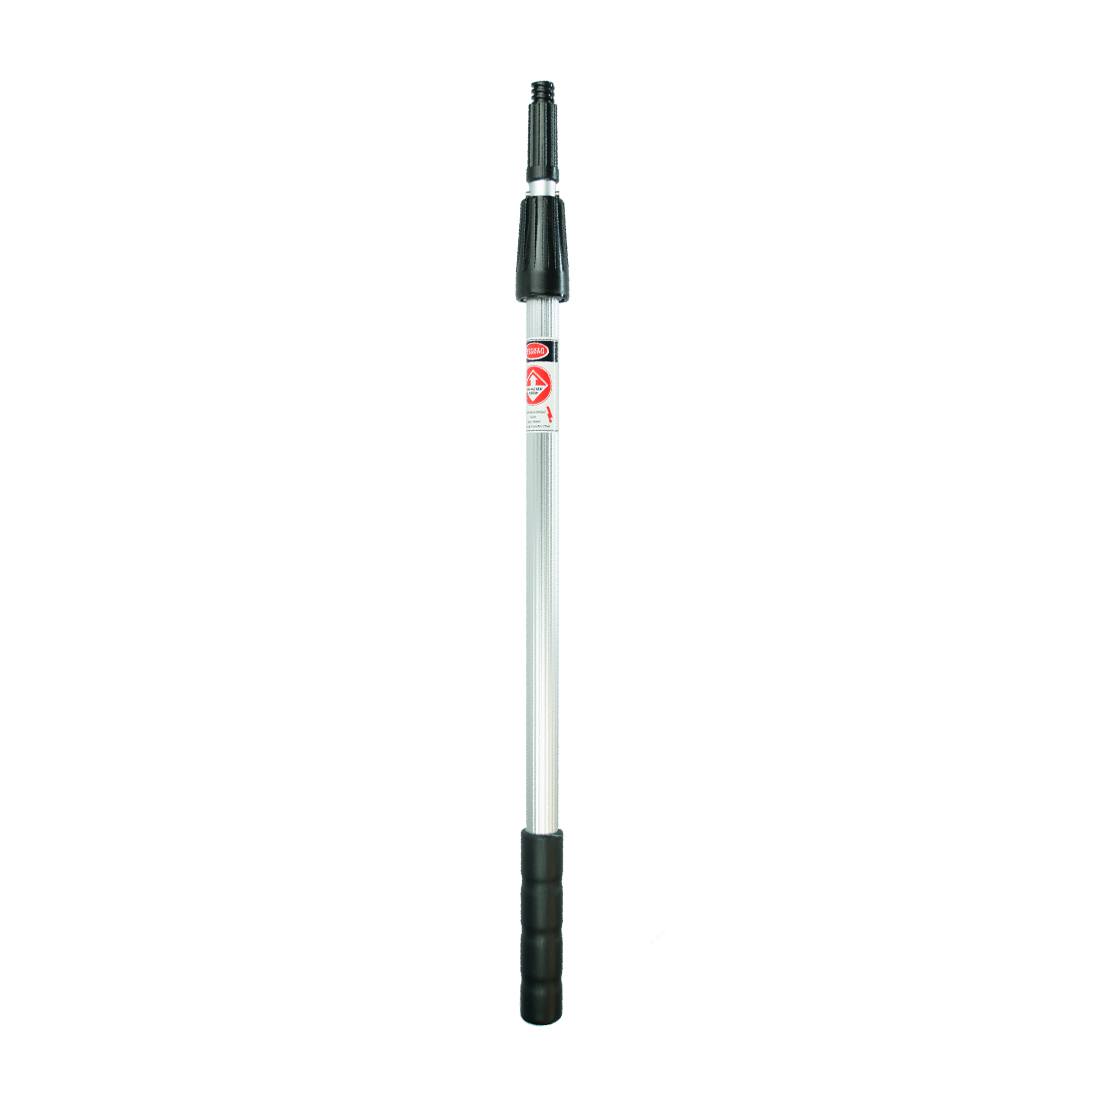 Pulex Telescopic Pole 2 Section Side View